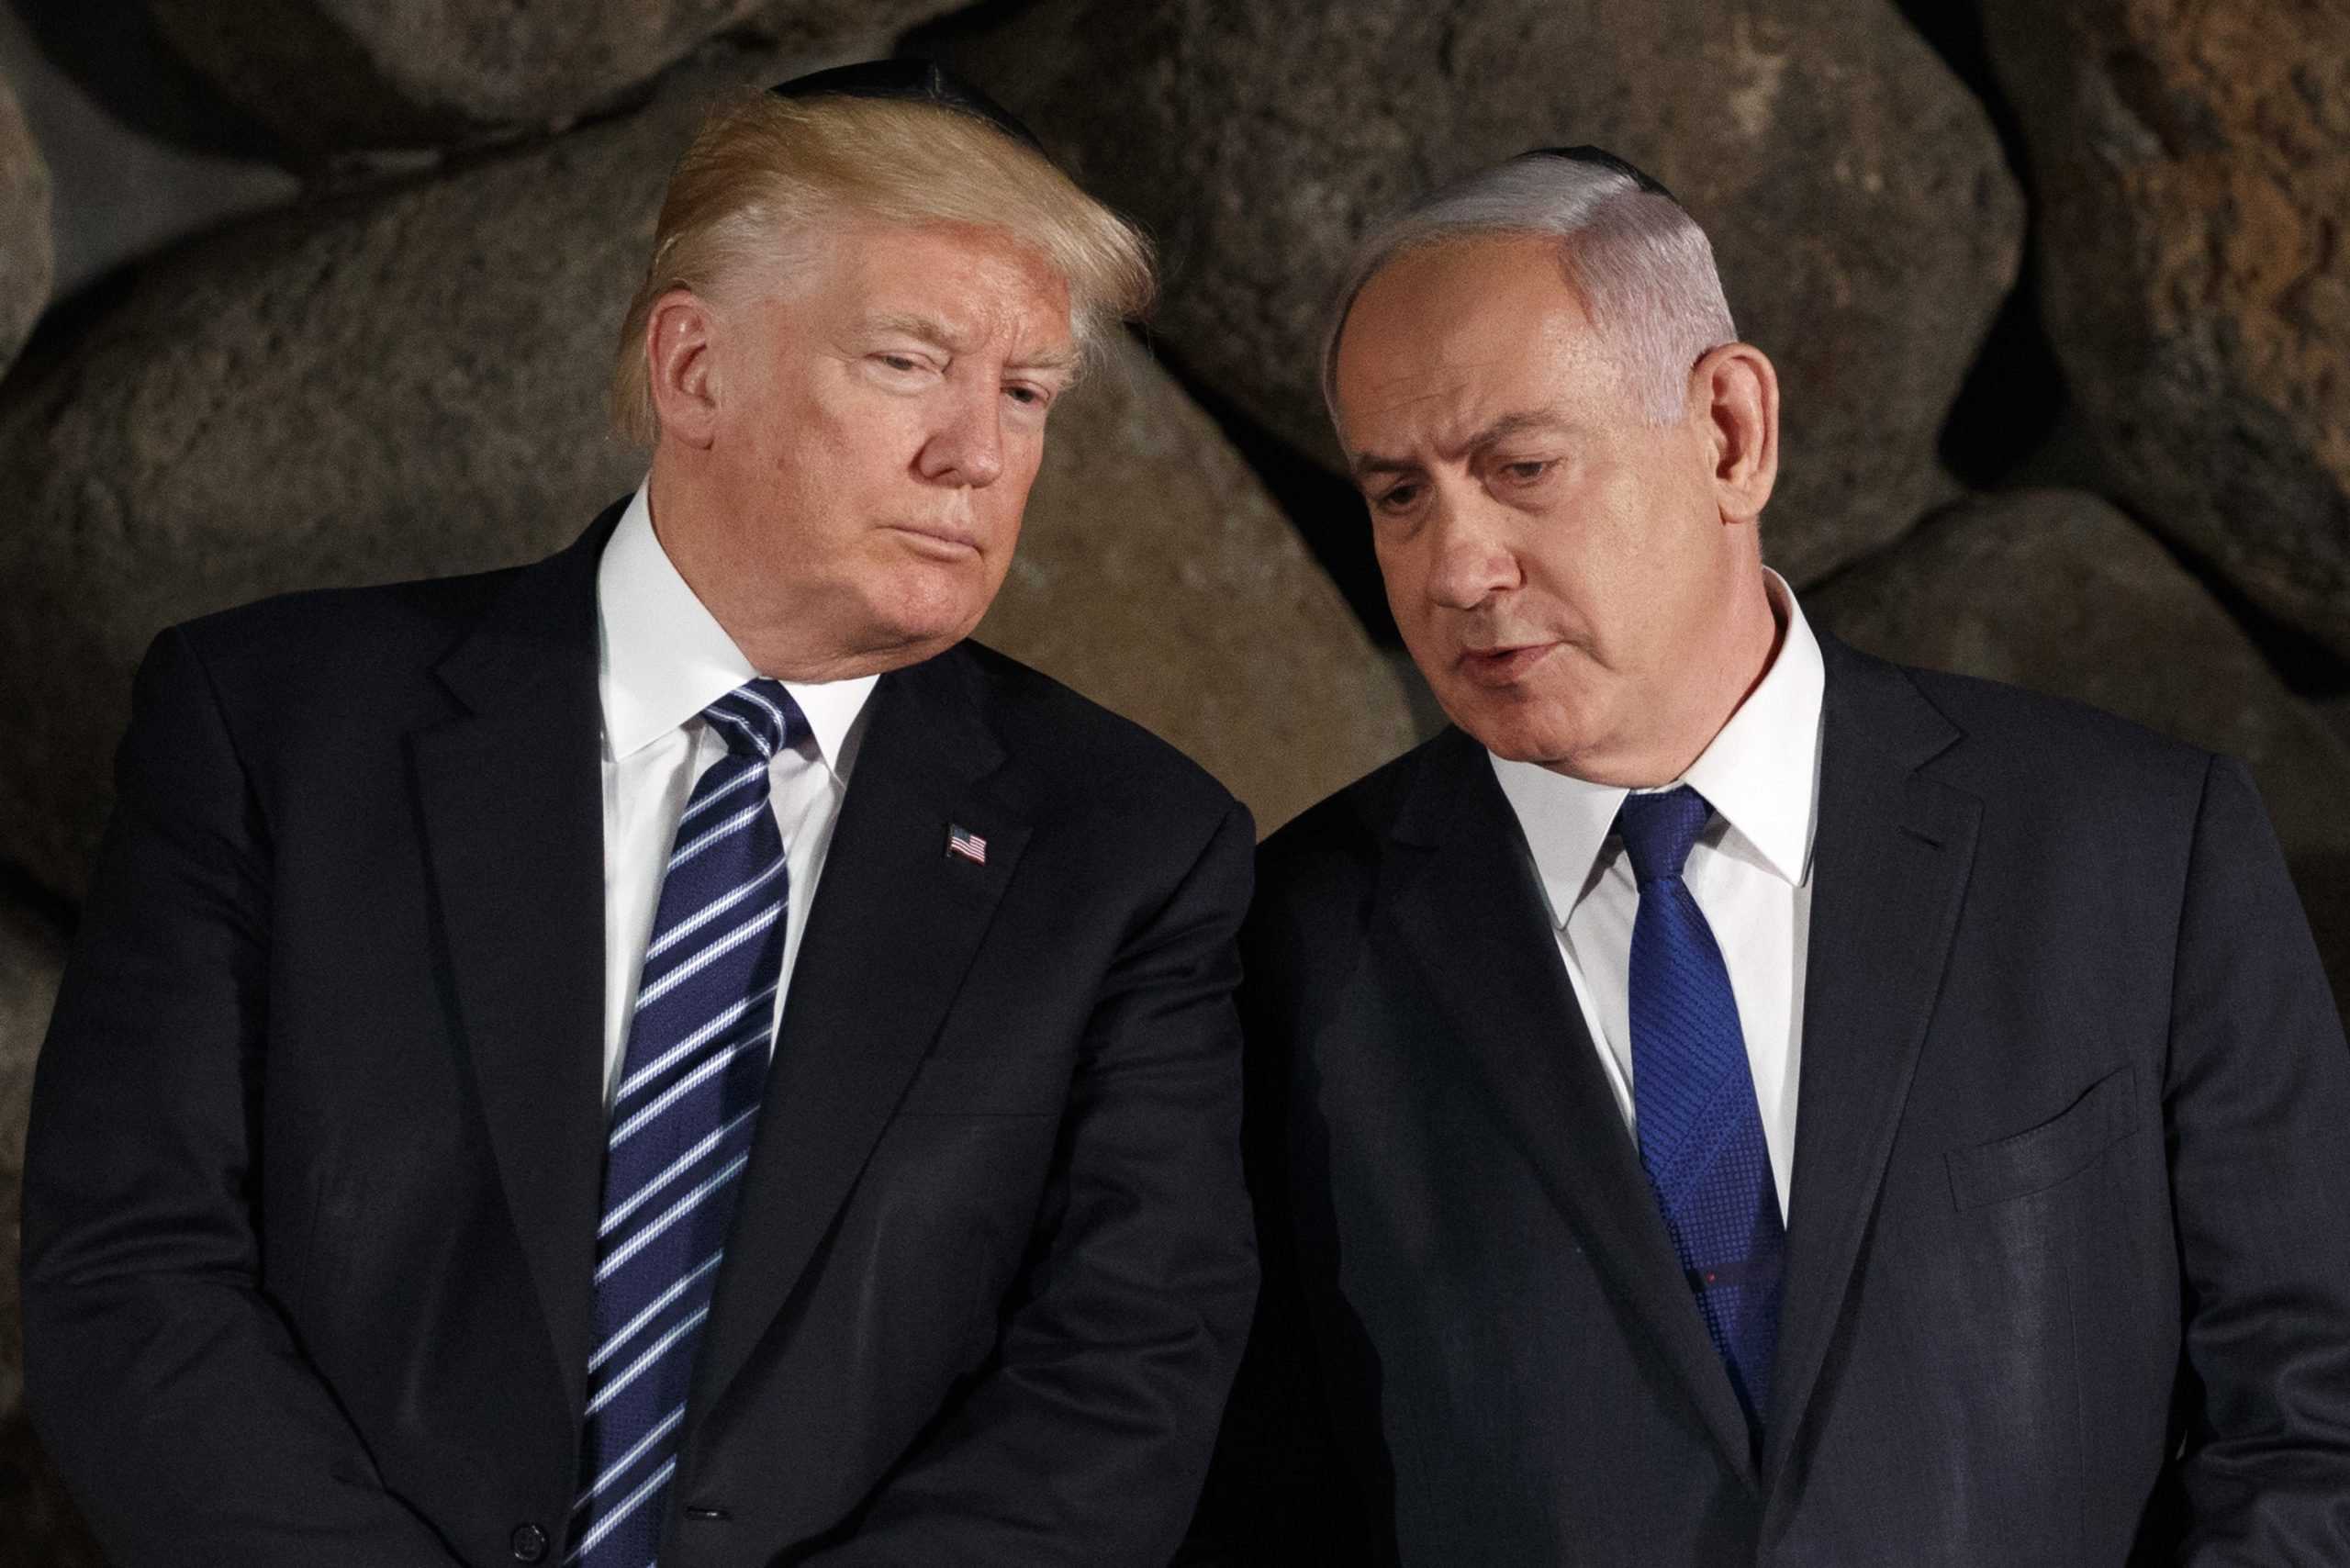 Donald Trump tells Israel to ‘get back to peace and stop killing people’